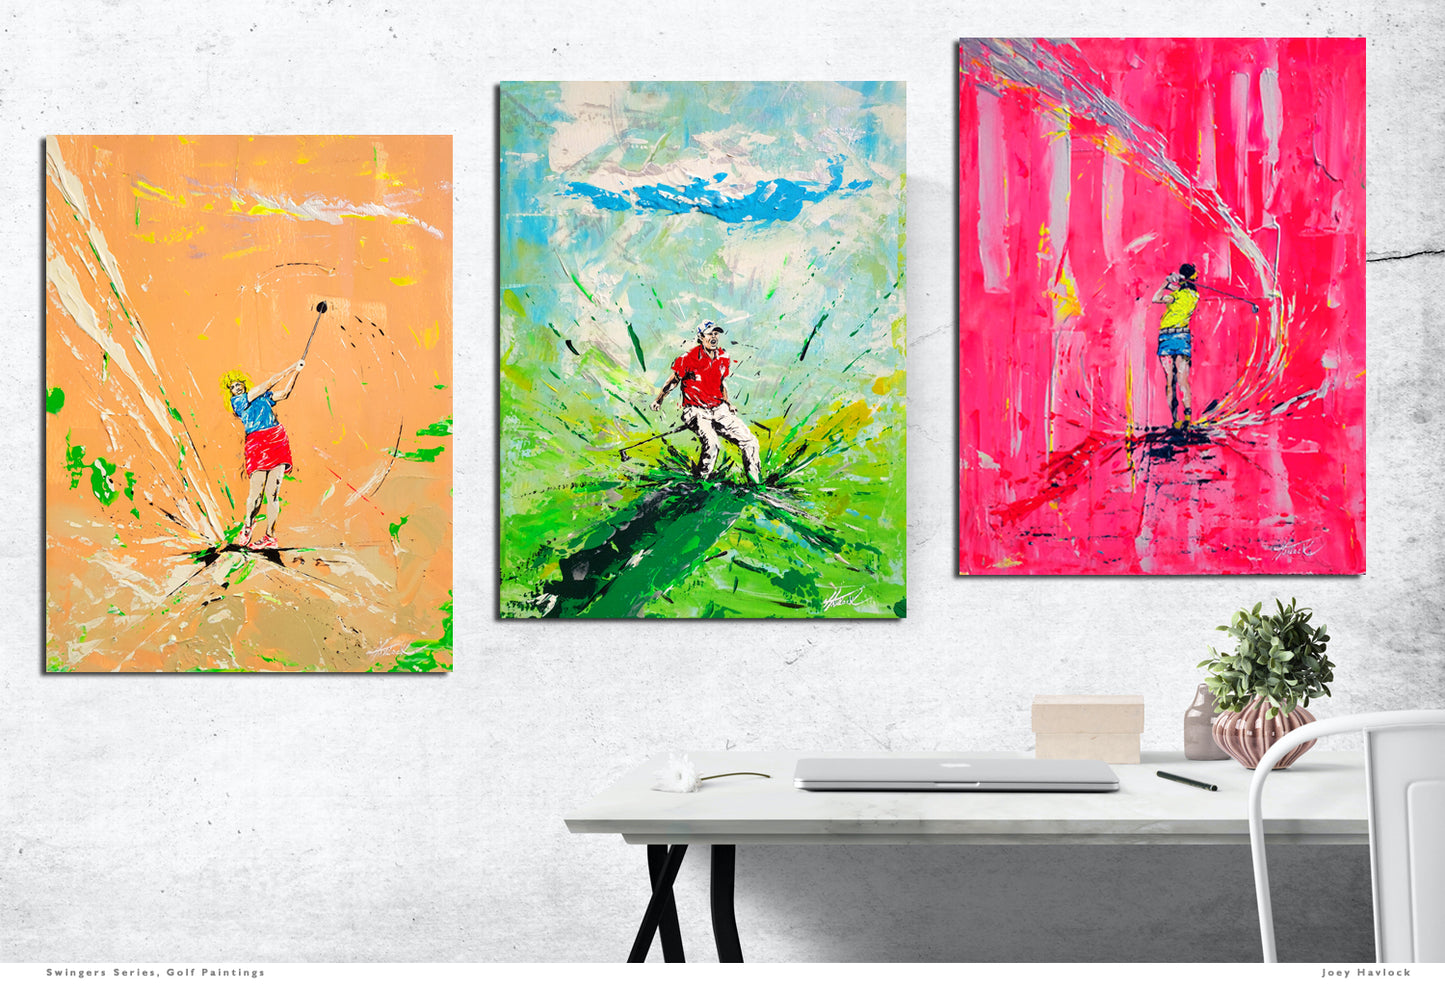 AN ICONIC MOMENT - Metal Print, Limited Edition 9" x 12" - SWINGERS - Impressionist Golf Series by Joey Havlock